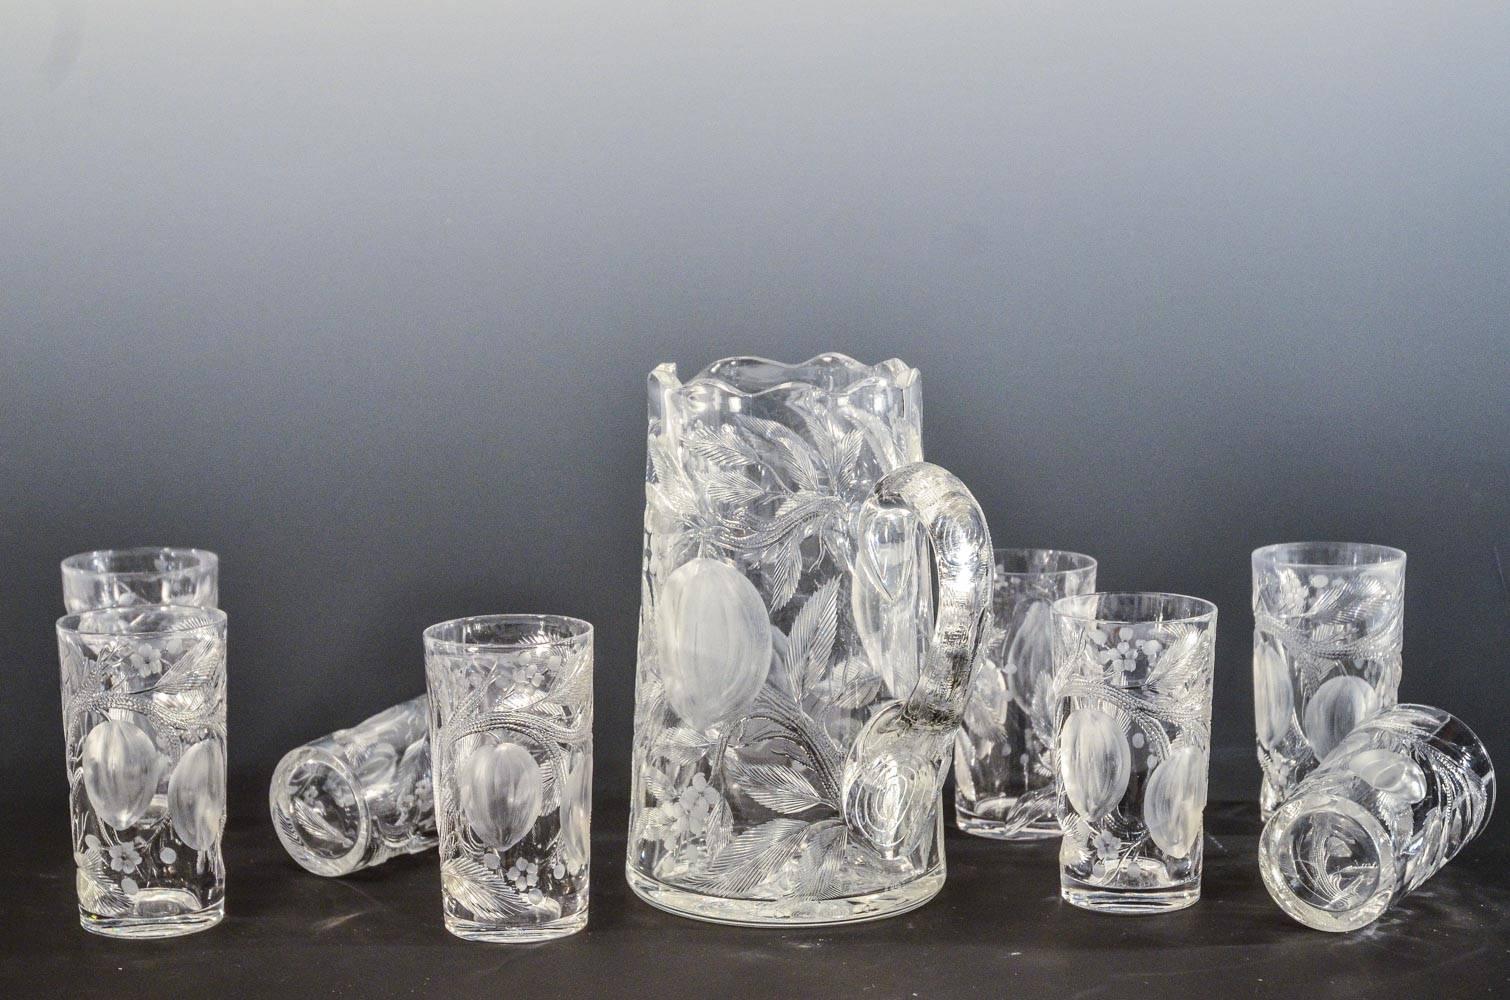  Set of Eight Hawkes Gravic Hand Blown Crystal Tumblers and Matching Pitcher 2